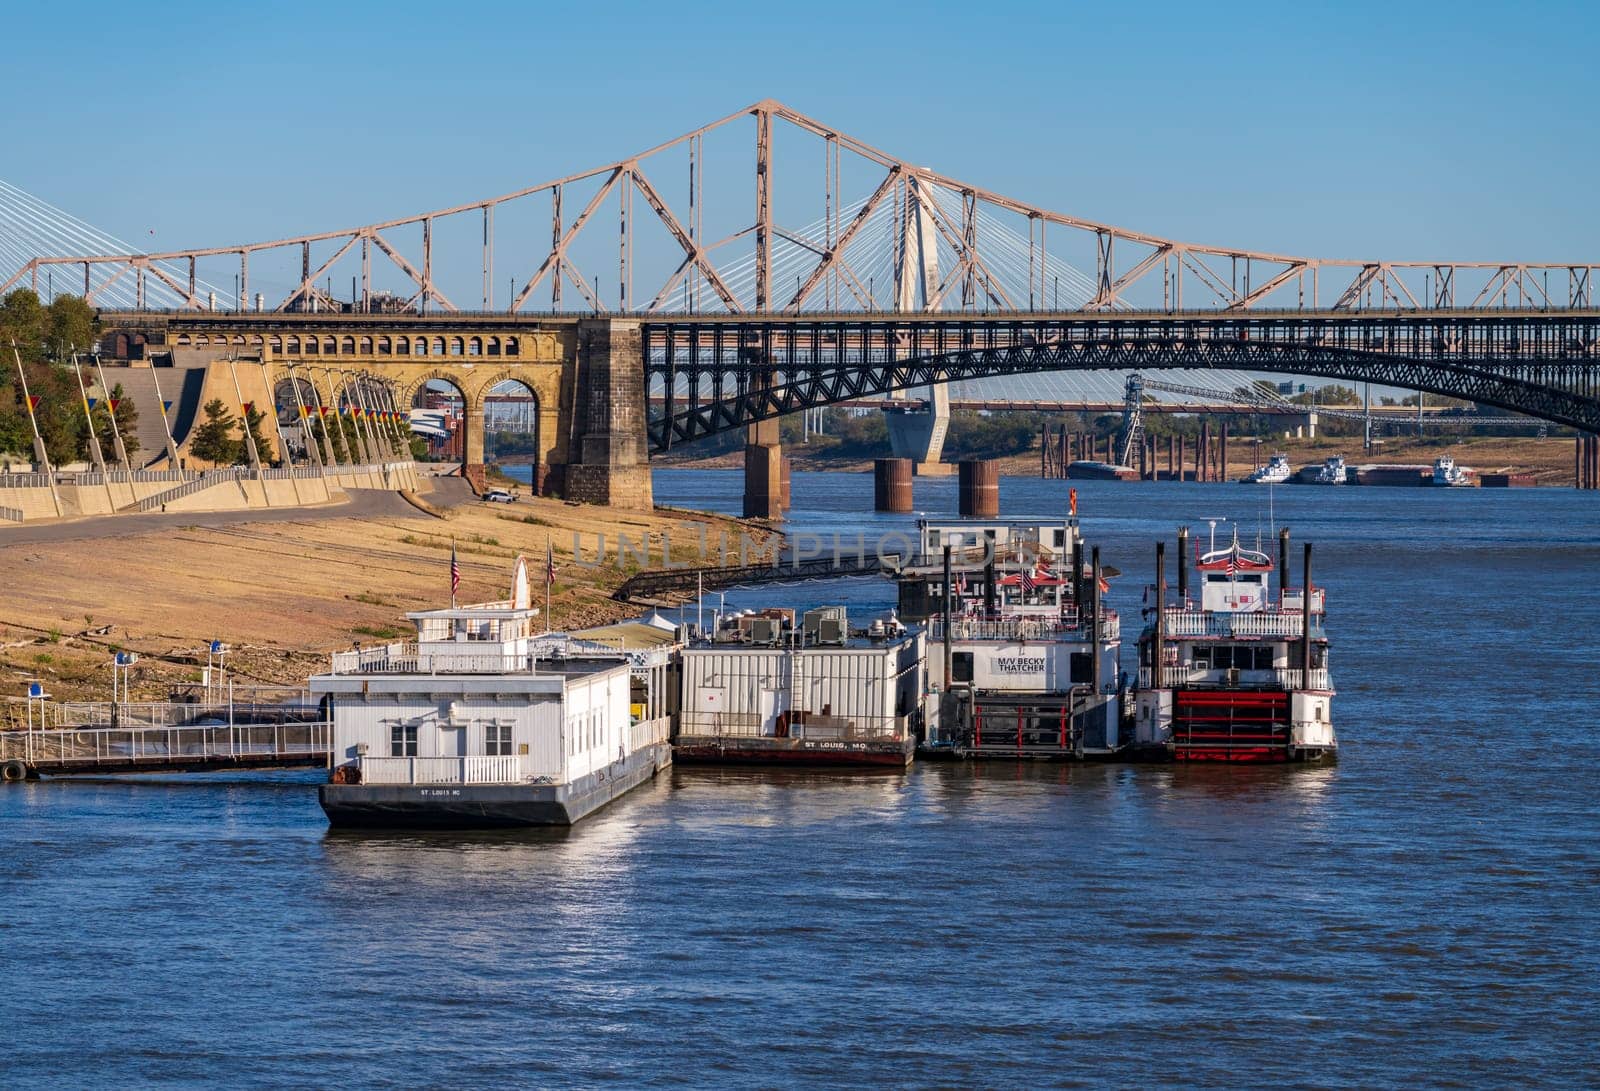 Casino riverboats on Mississippi river in St Louis MO by steheap